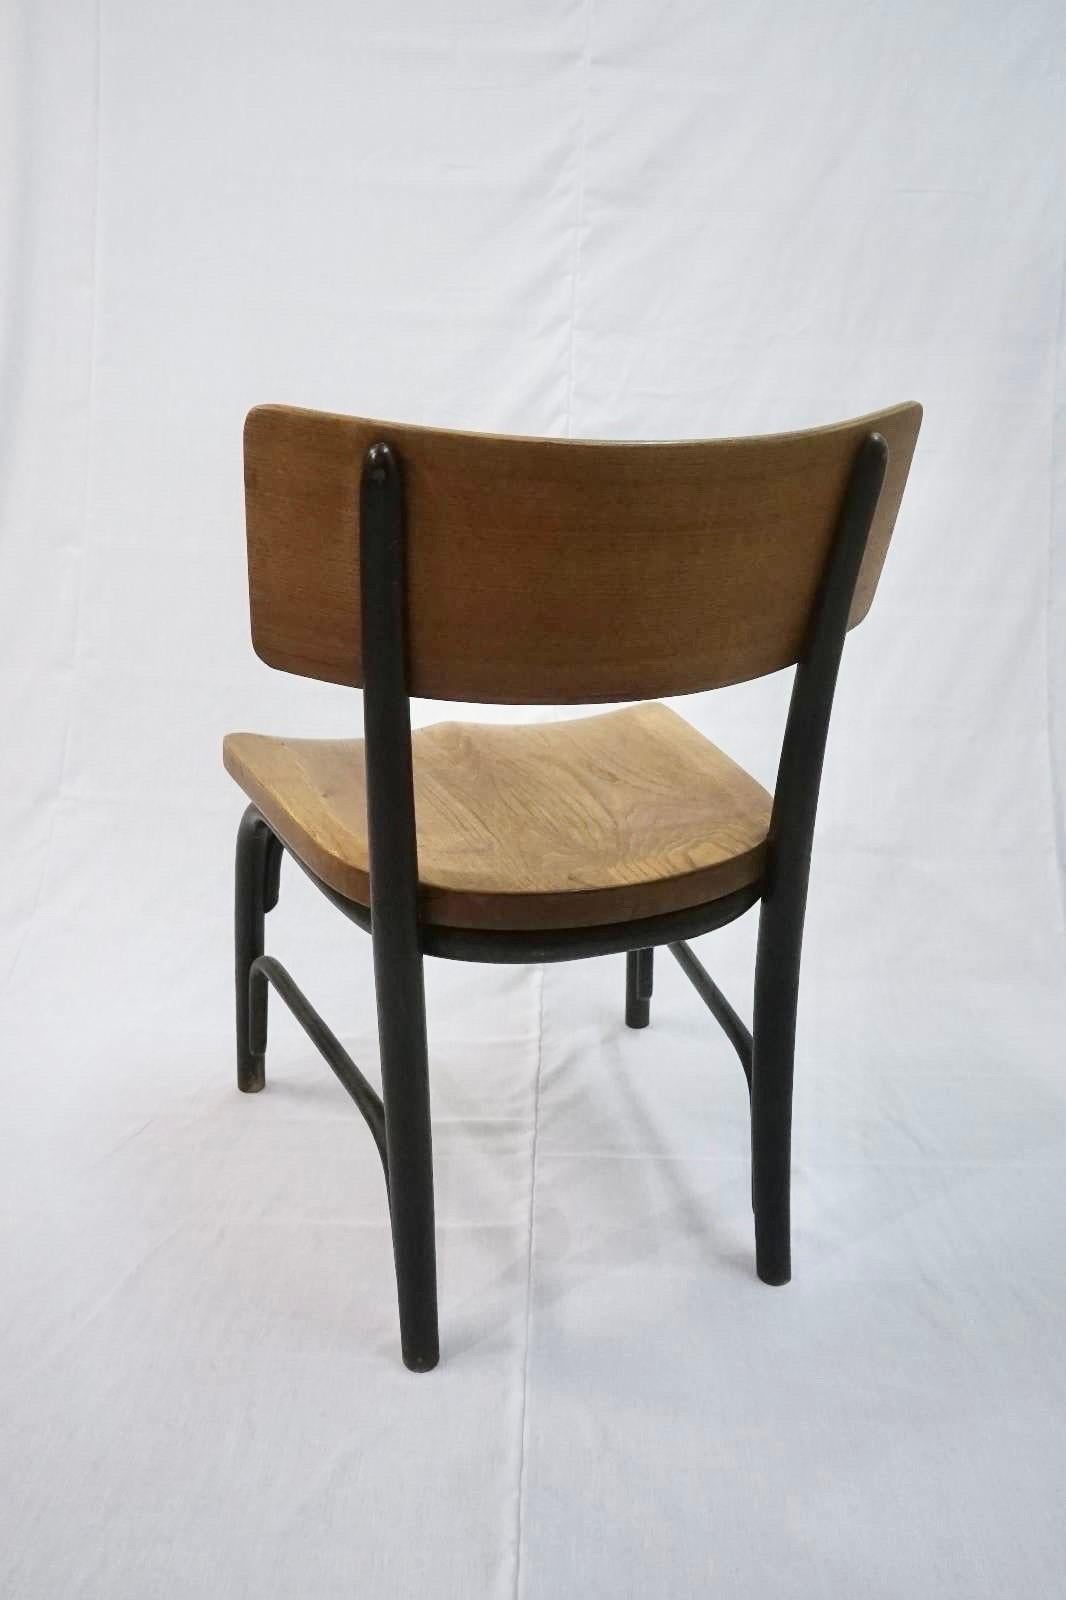 Rare and important Frits Schlegel Husum chair produced by Fritz Hansen in the 1930’s.
The chair is designed by the danish architect Frits Schlegel for the teachers room in the primary school in Husum in the outskirts of Copenhagen, therefore the